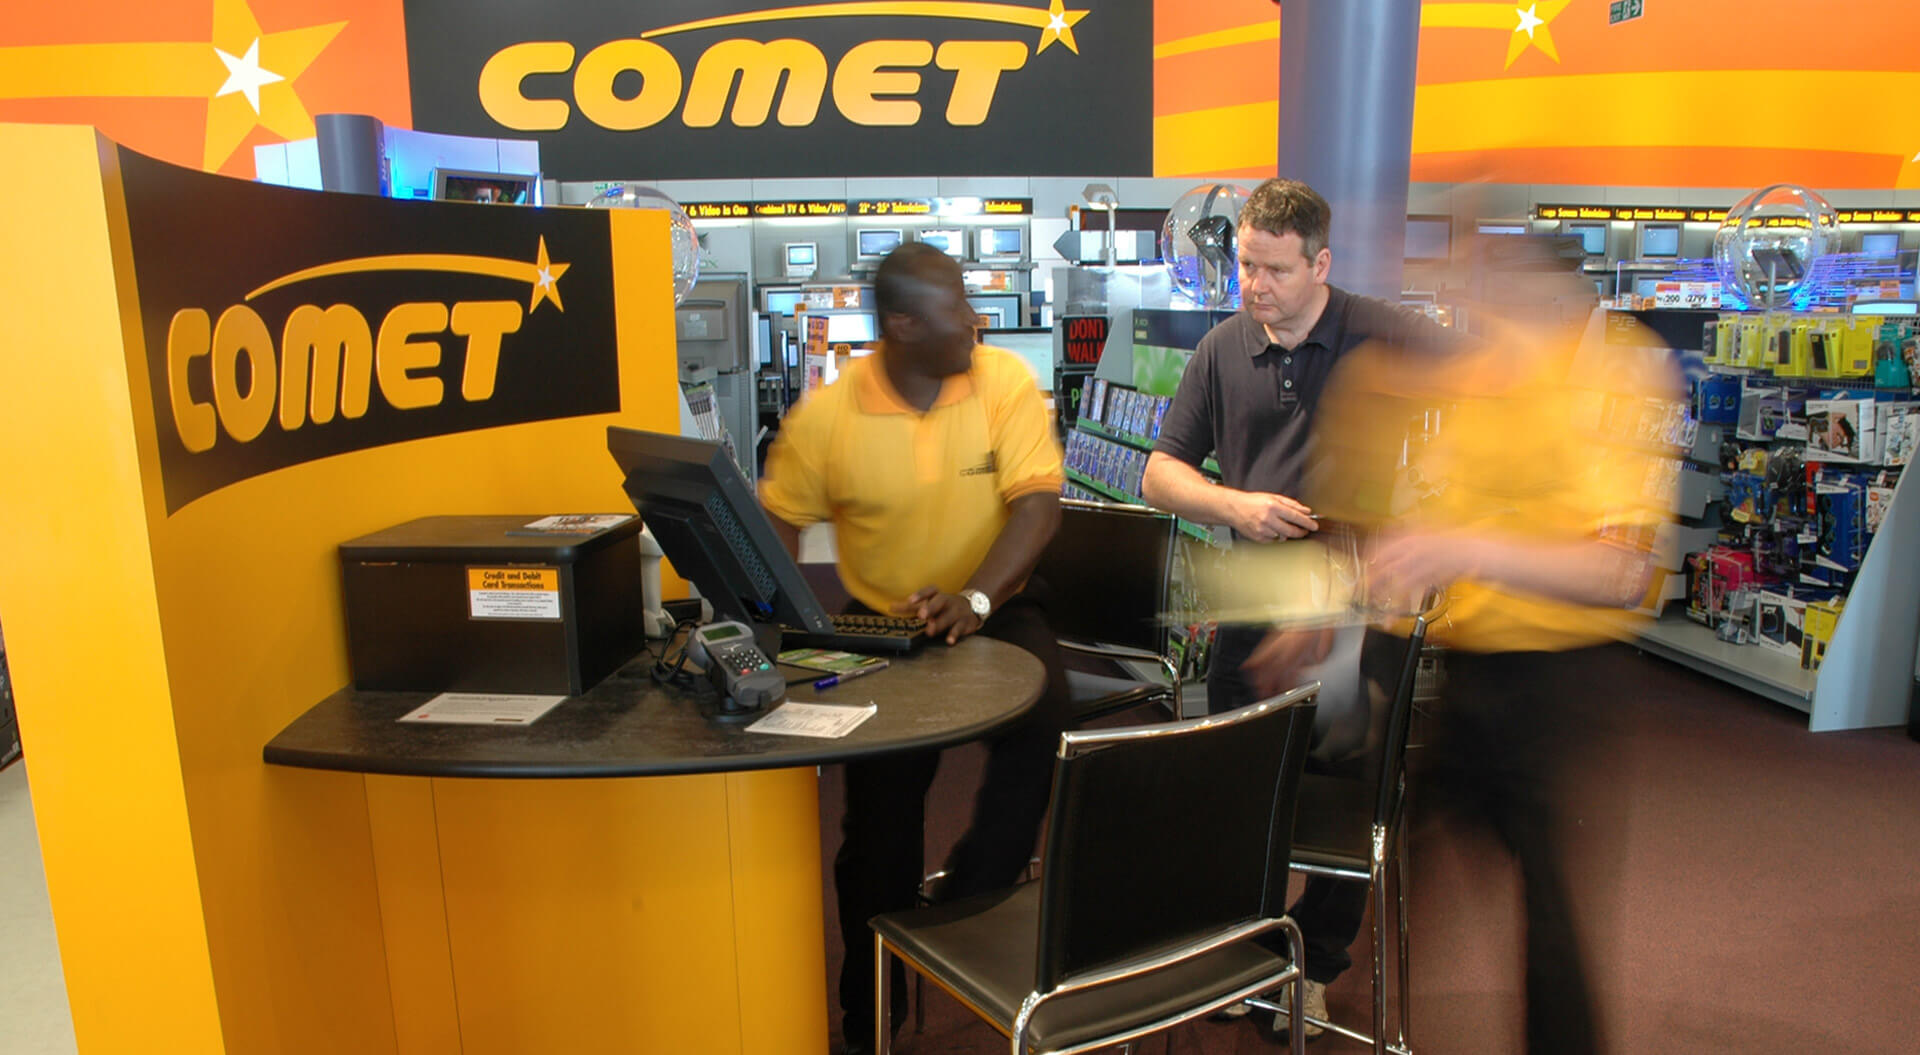 Comet electronic and technology reatil store design customer service desk